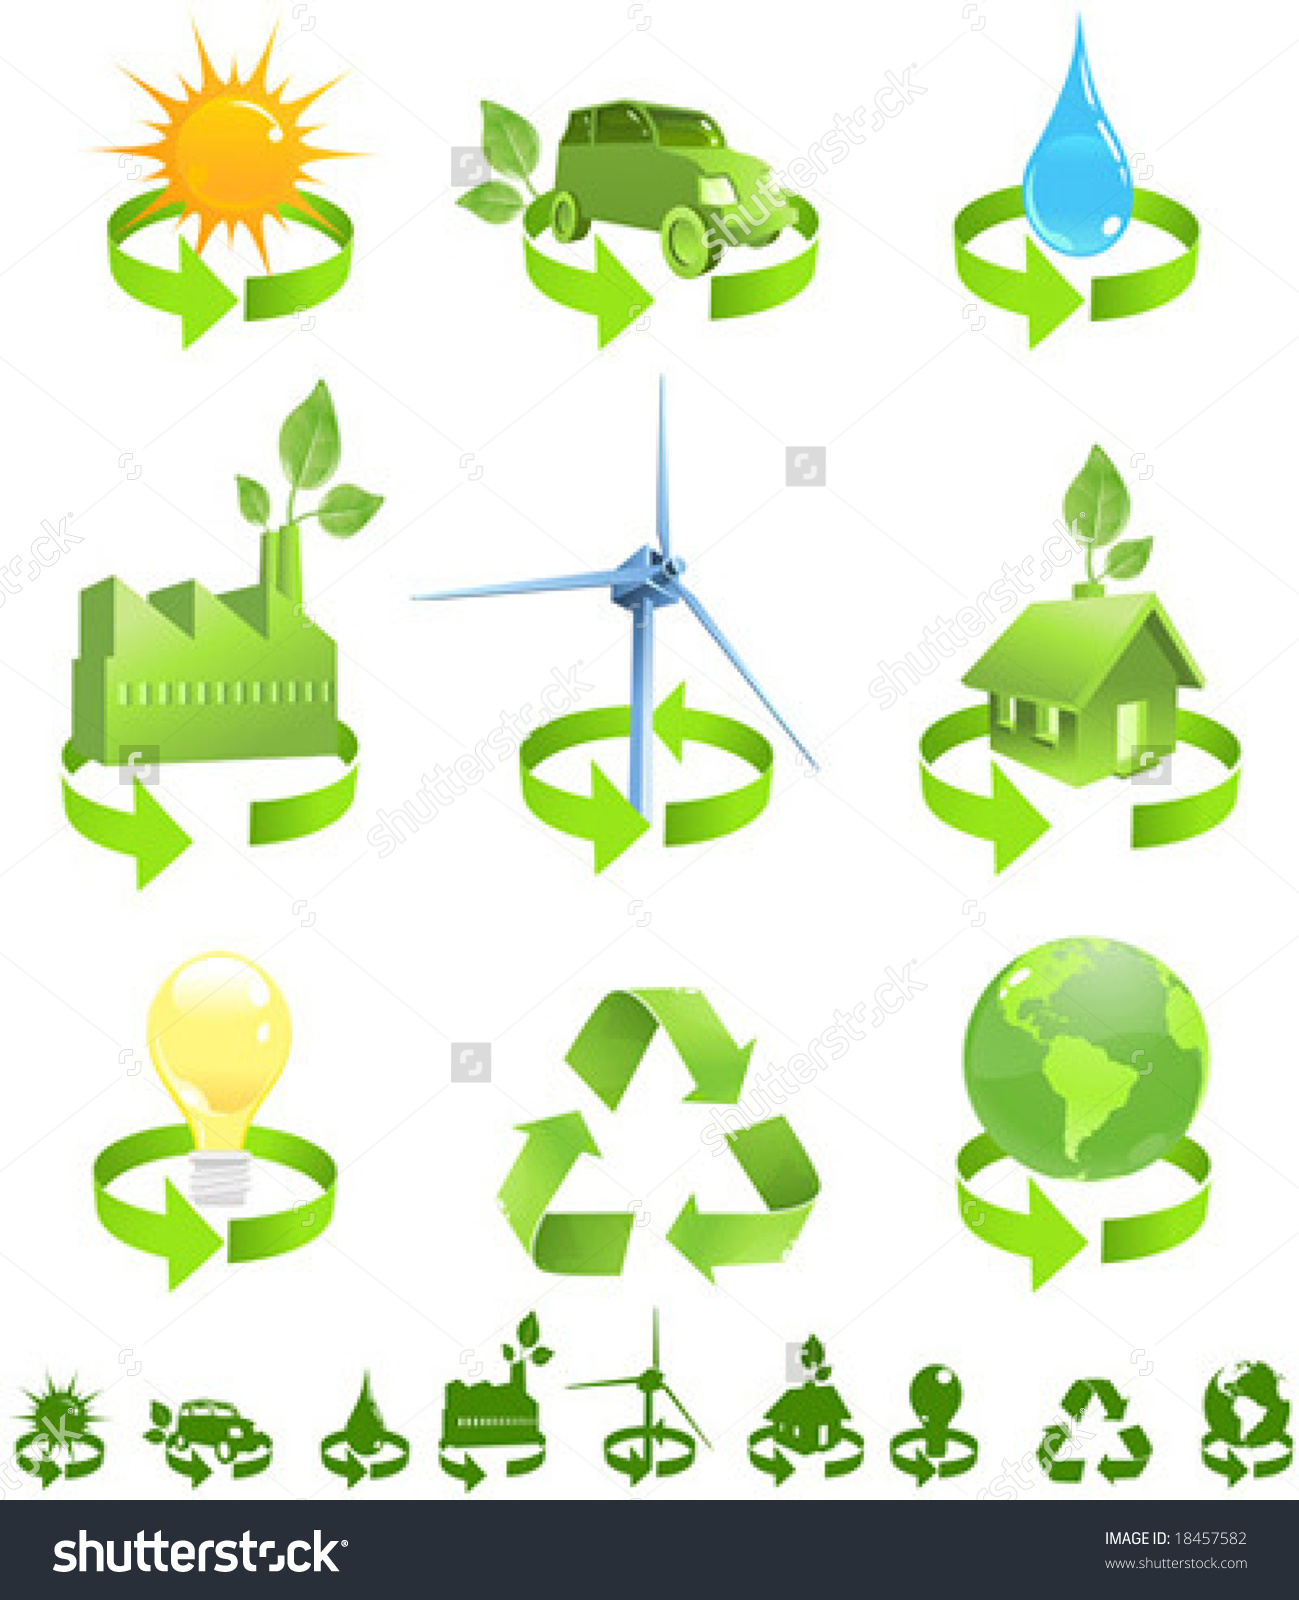 Green Vector Icons Show Forms Recycled Stock Vector 18457582.